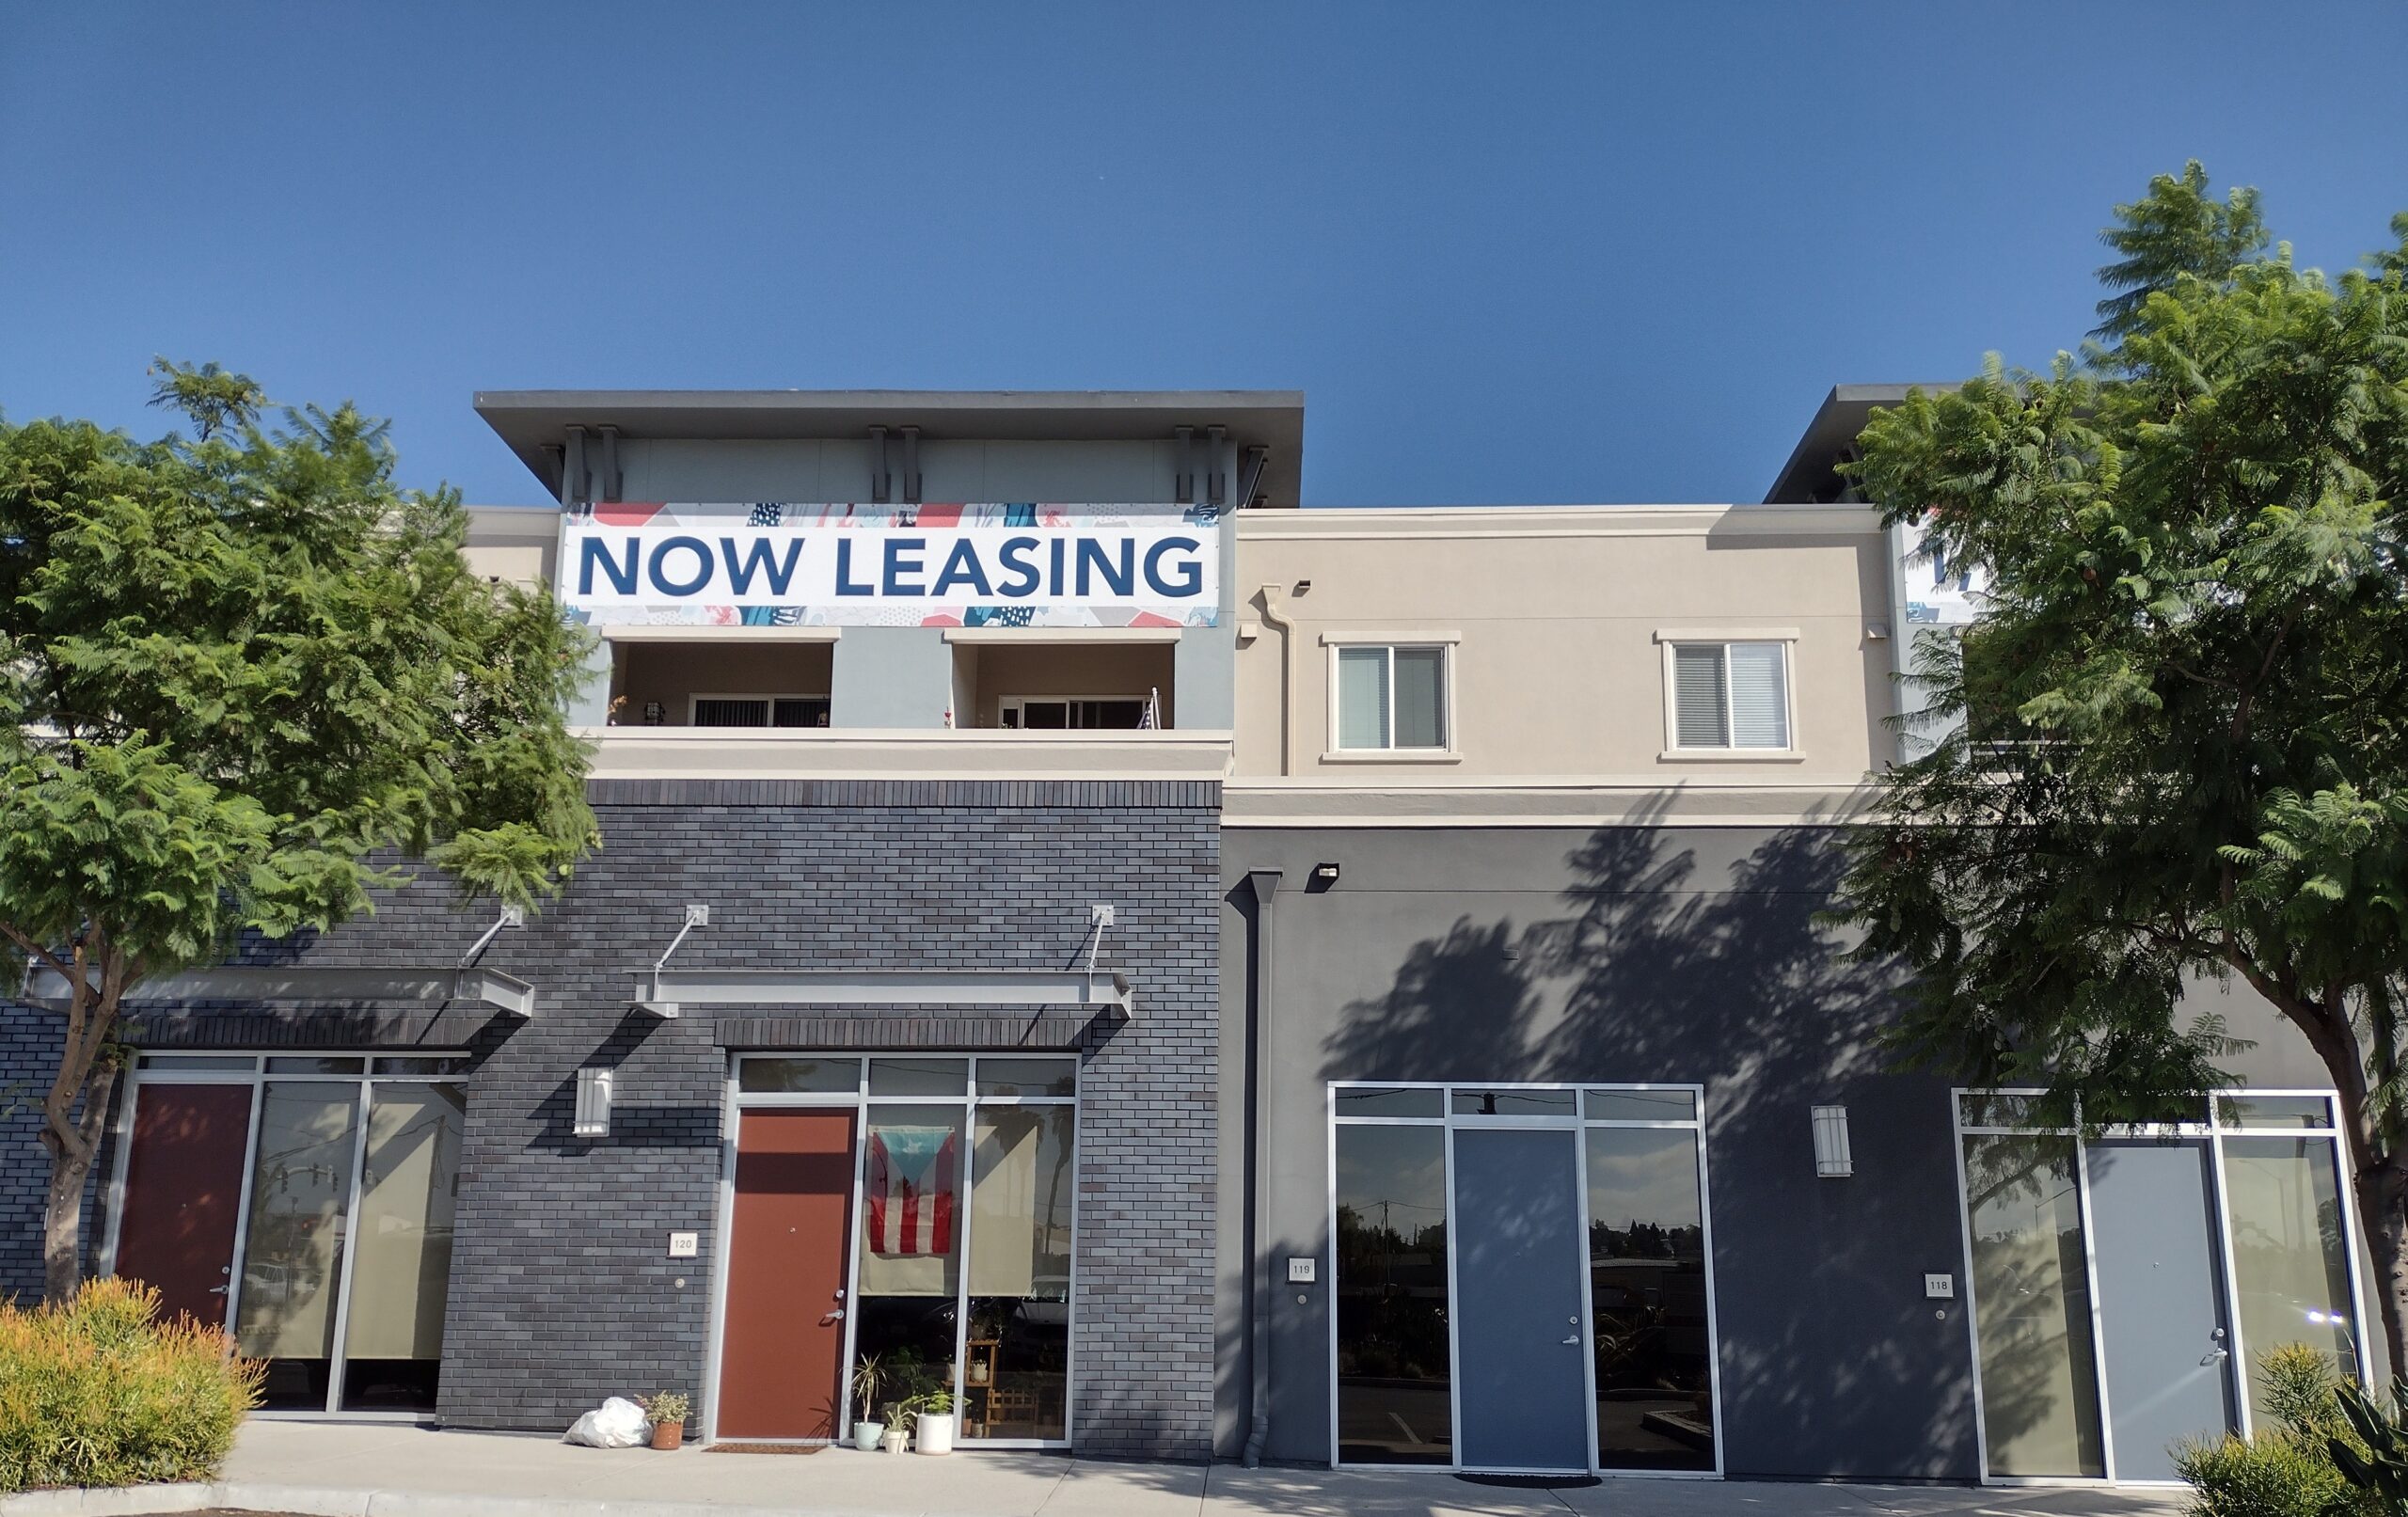 A Now Leasing sign is hung on the side of an apartment complex on Las Posas Avenue in San Marcos. The building is gray and beige with bricks and stucco facade.